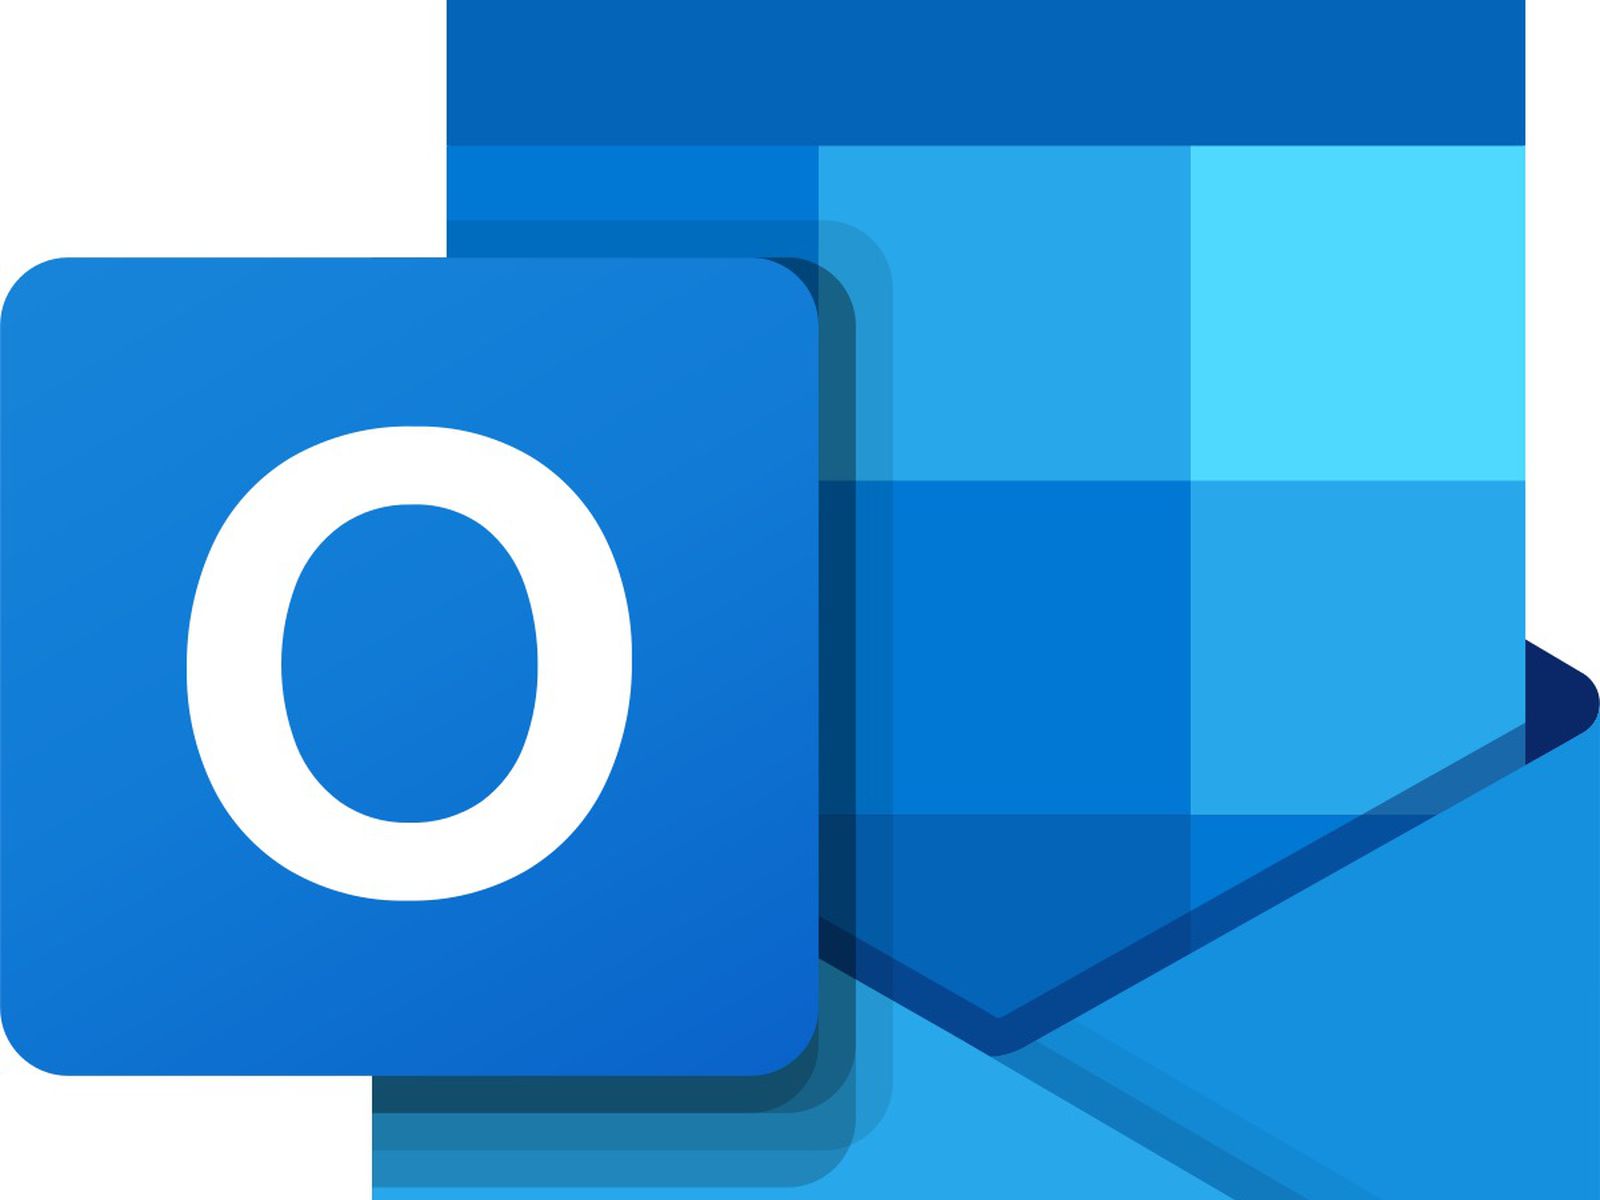 mac microsoft outlook opens then closes